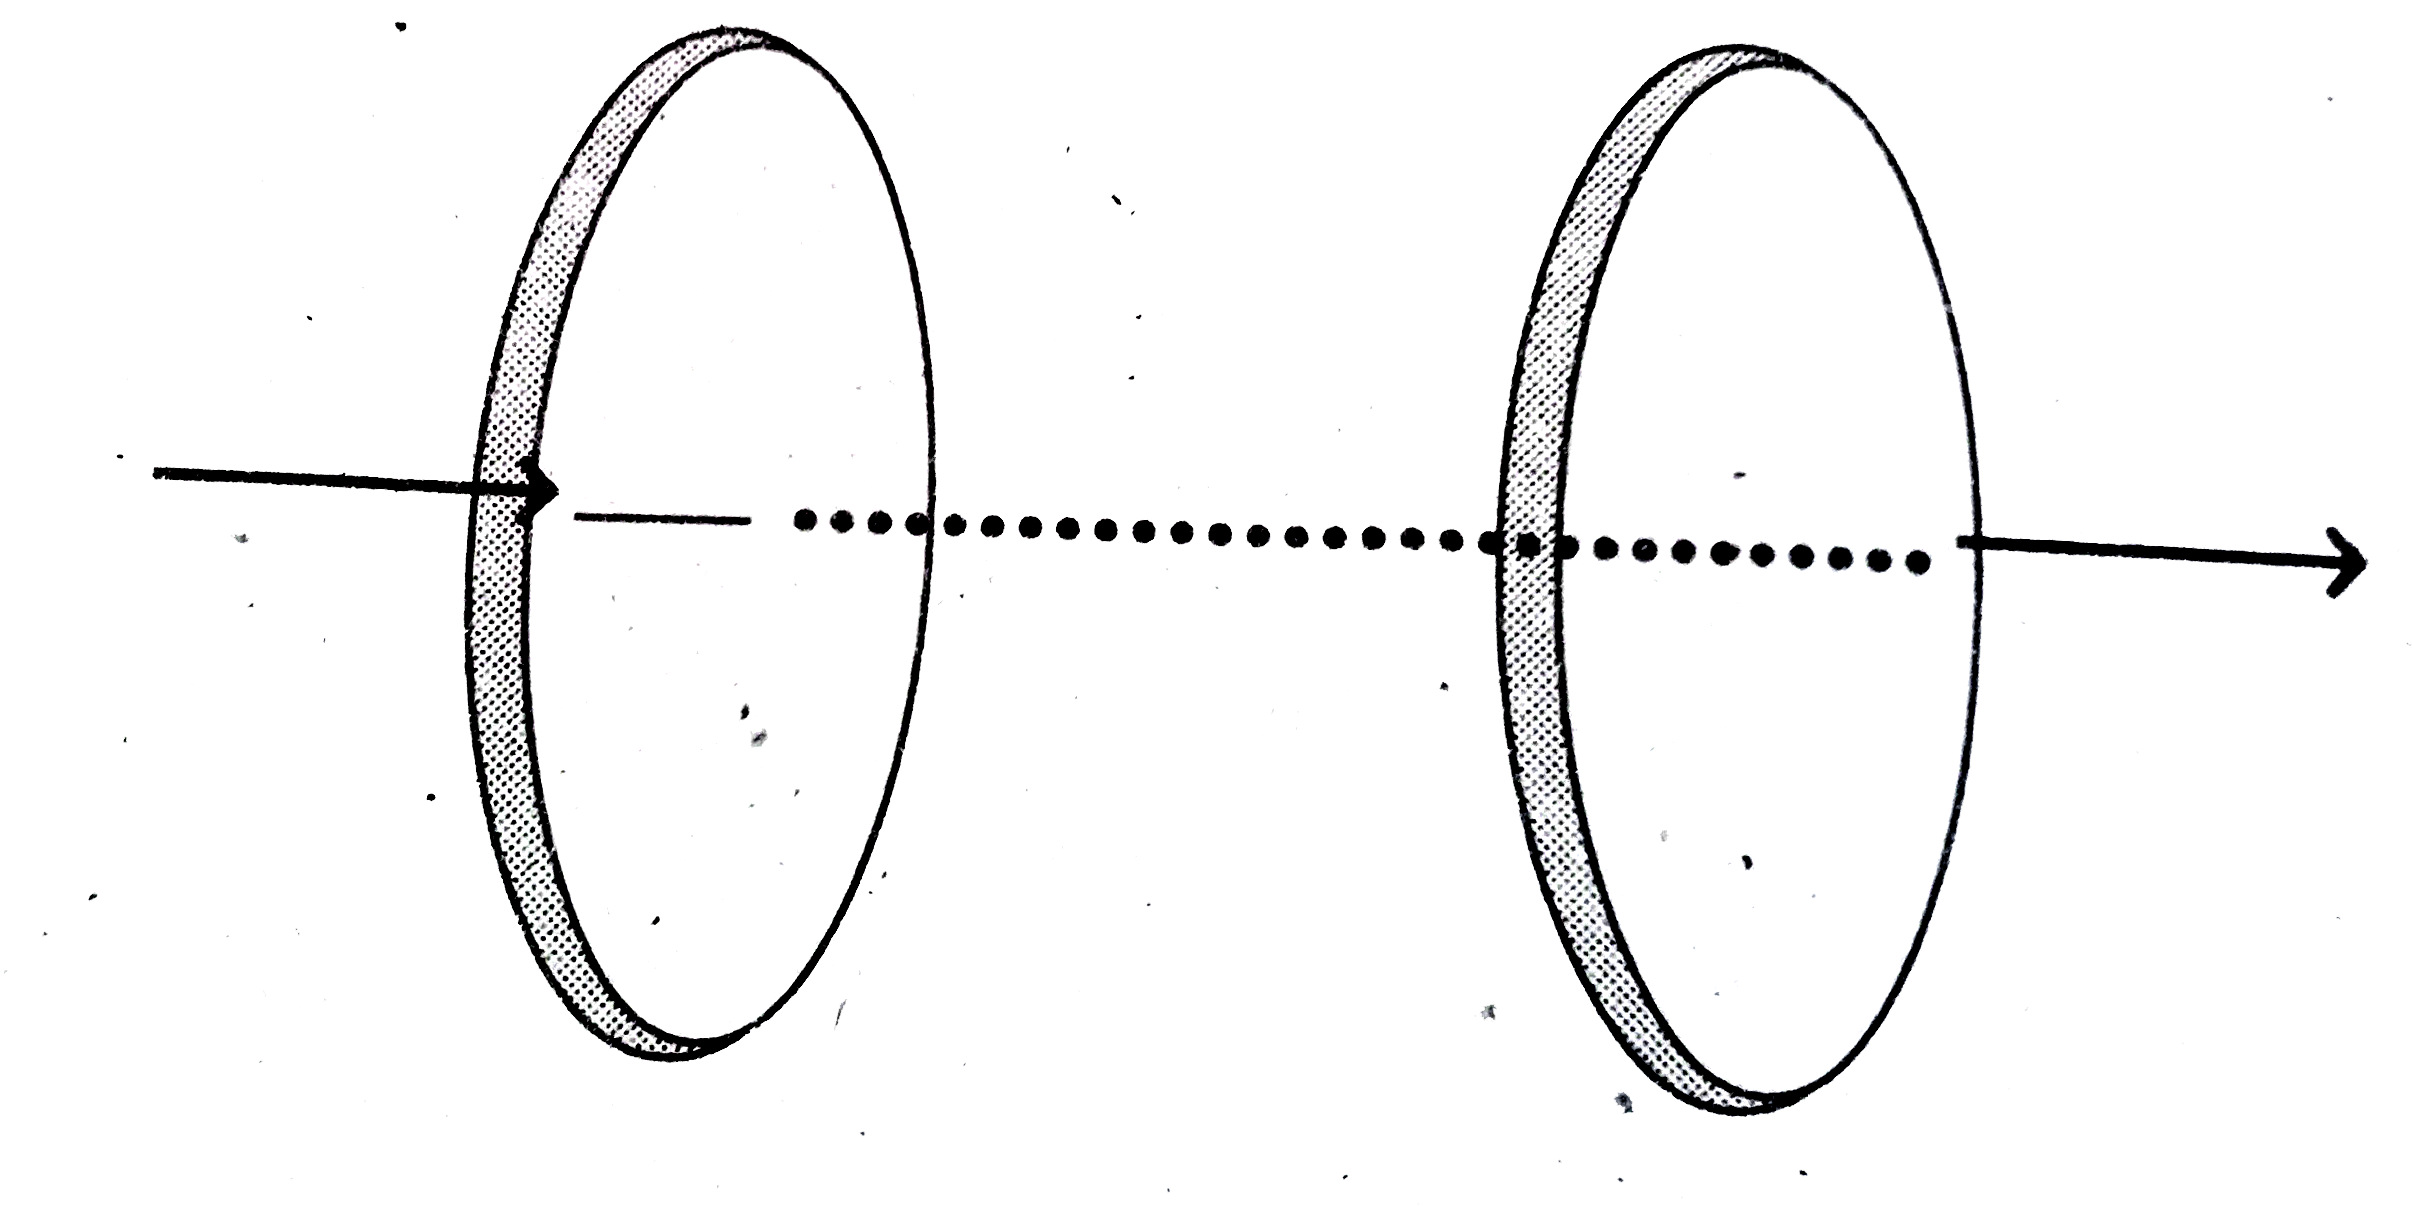 The figure shows a capacitor made of two circular plates each of radius 12 cm, and separated by 5.0 cm . The capacitor is beging charged by an external source (not shown in the figure. ) The charing is constant and equal to 0.15 A       Is Kirchhoff's first rule (junction rule) valid at each plate of the capacitor ? Explain.